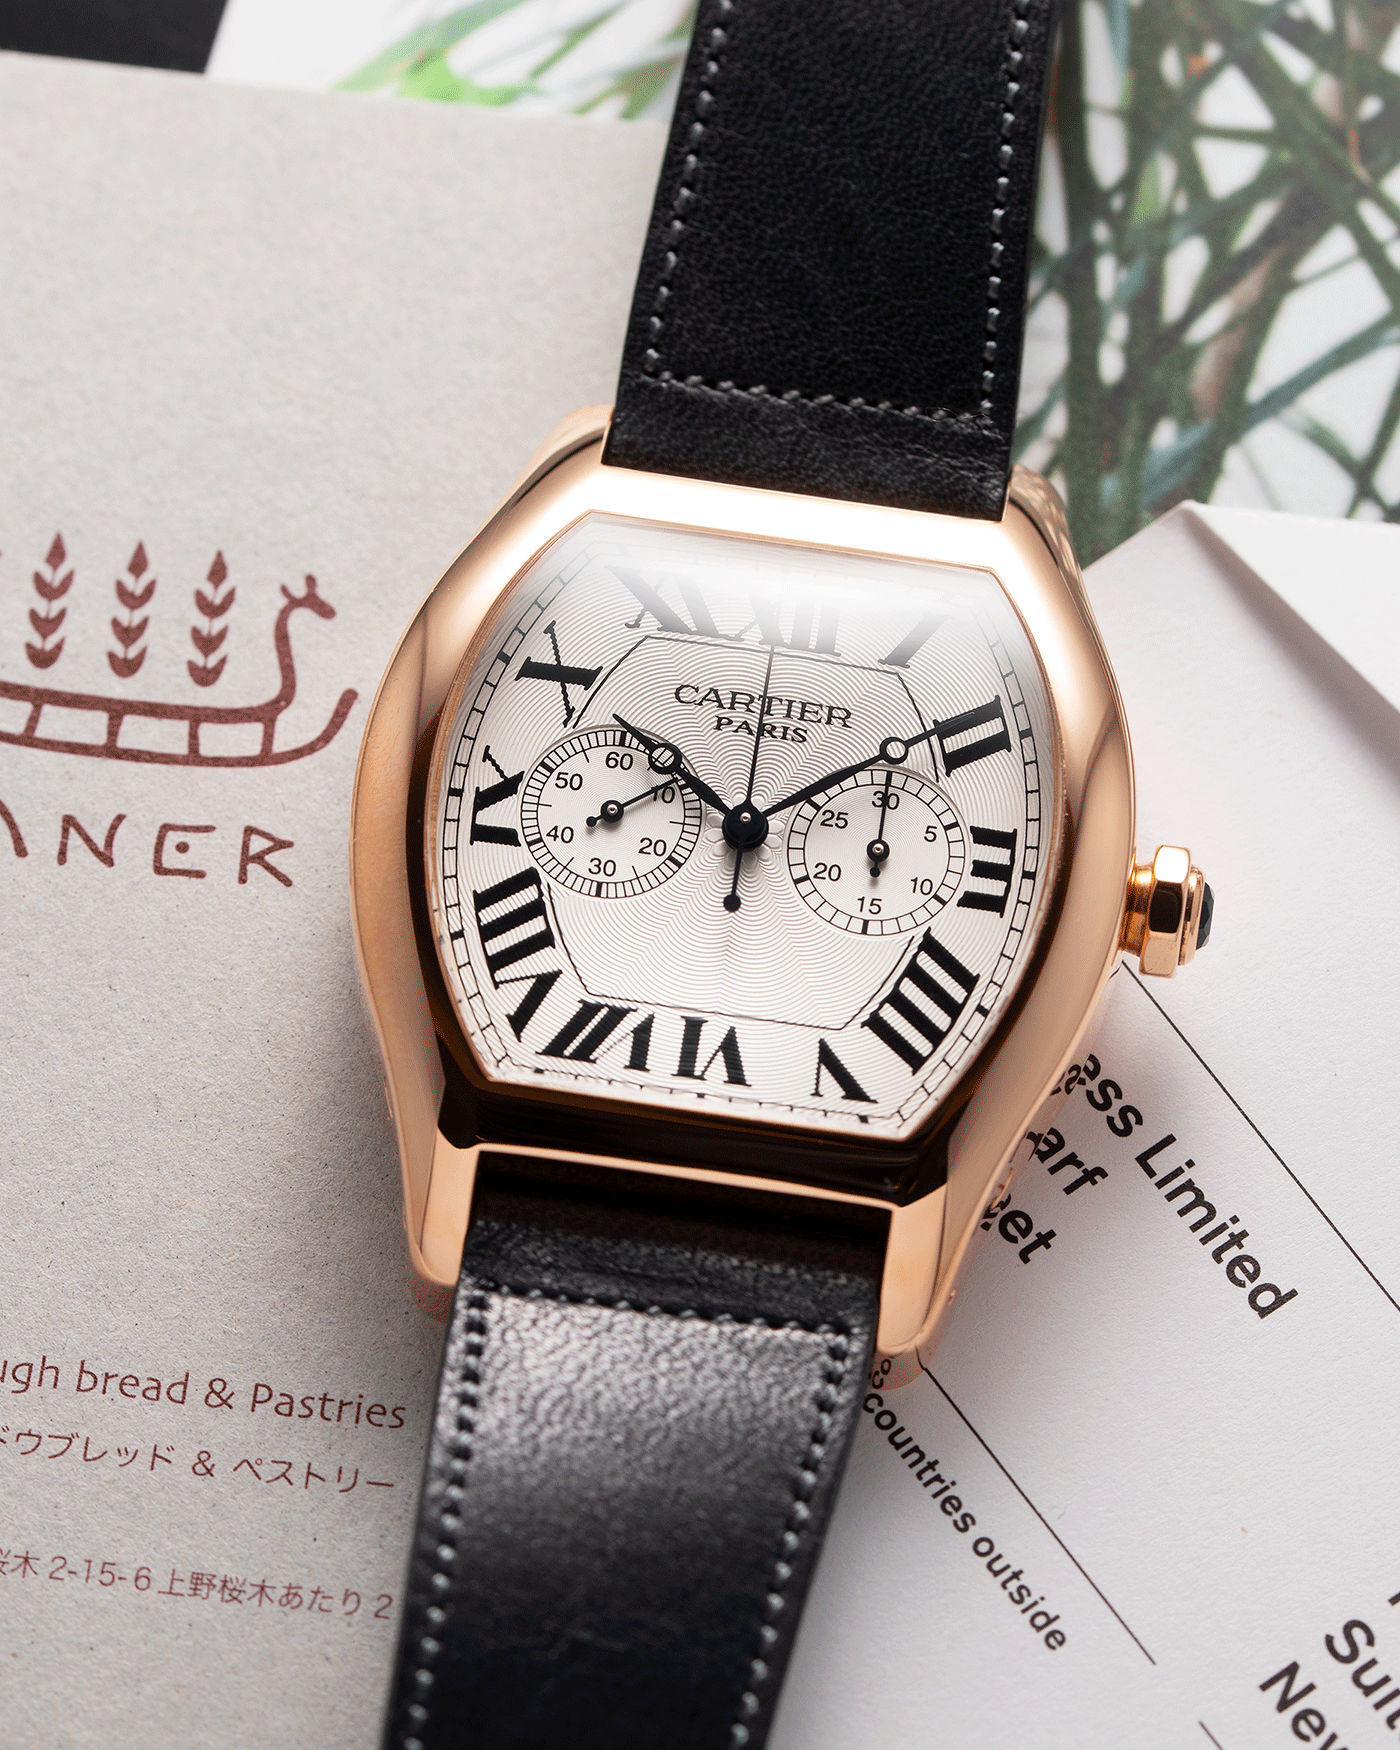 Brand: Cartier Year: 2005 Model: CPCP Collection Prive Tortue Monopoussoir XL Reference: 2781 Material: 18k Rose Gold Movement: THA Cal. 045MC Case Diameter: 37 x 39 mm Strap: Navy Blue Accurate Form Japanese Calf Strap with separate 18k Cartier Rose Gold Deployant